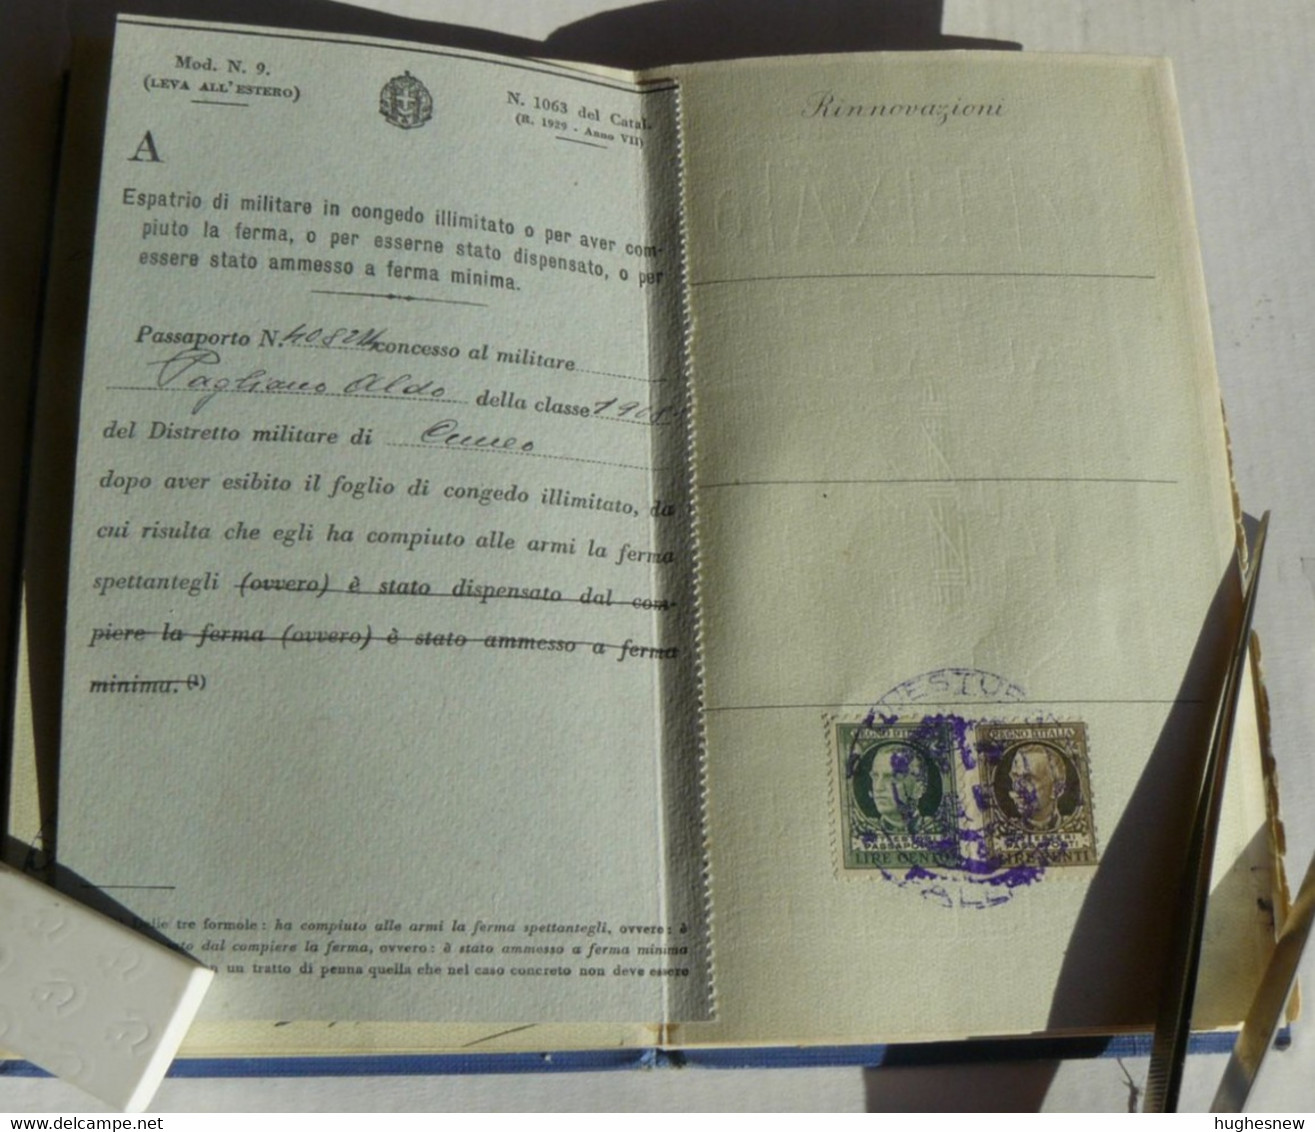 PALERMO1936_ITALIAN  PASSPORT ISSUED POLICE  INSPECTOR PUBLIC SAFETY  REVENUE  STAMPS  OF  ITALY, YUGOSLAVIA, FRANCE ecc